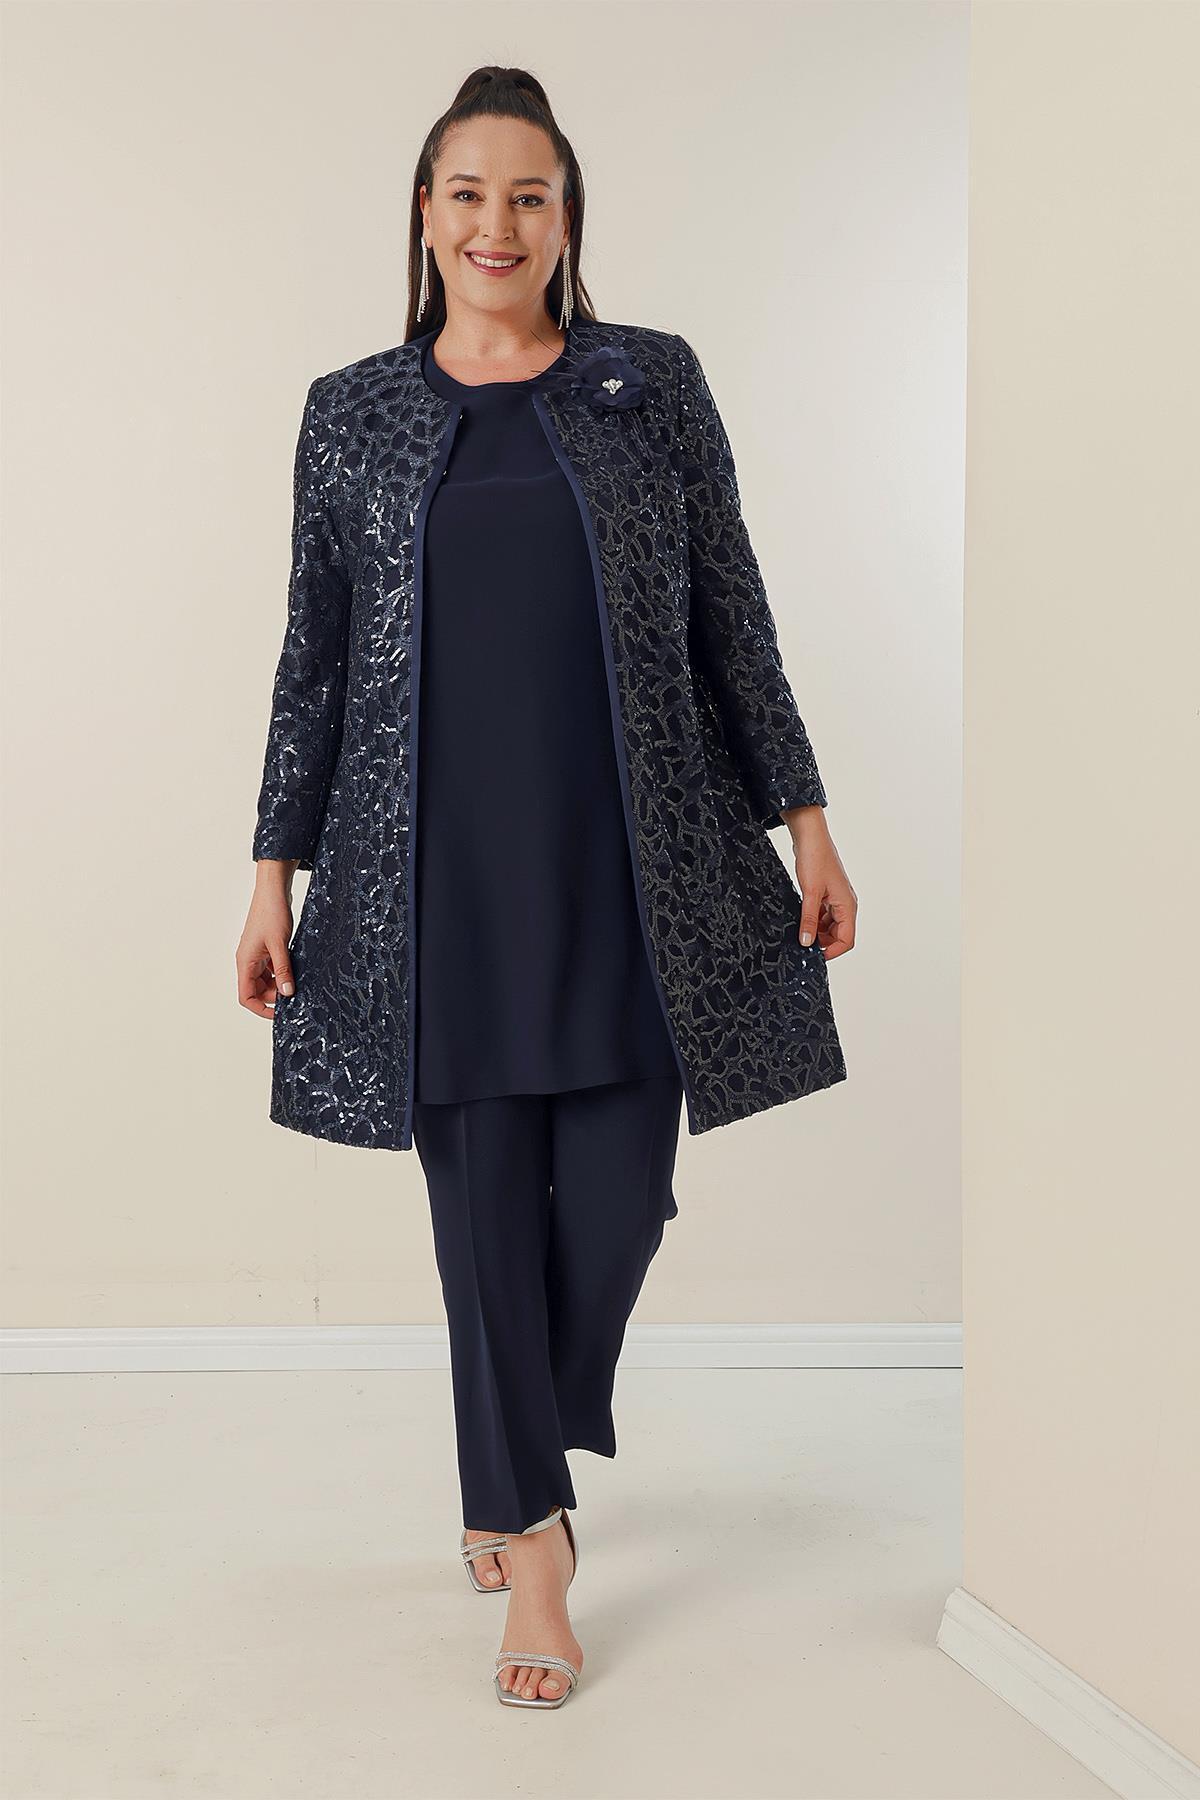 Levně By Saygı Crepe blouse with slits in the sides and fleece lined front, jacket and pants Plus Size 3-piece Set.